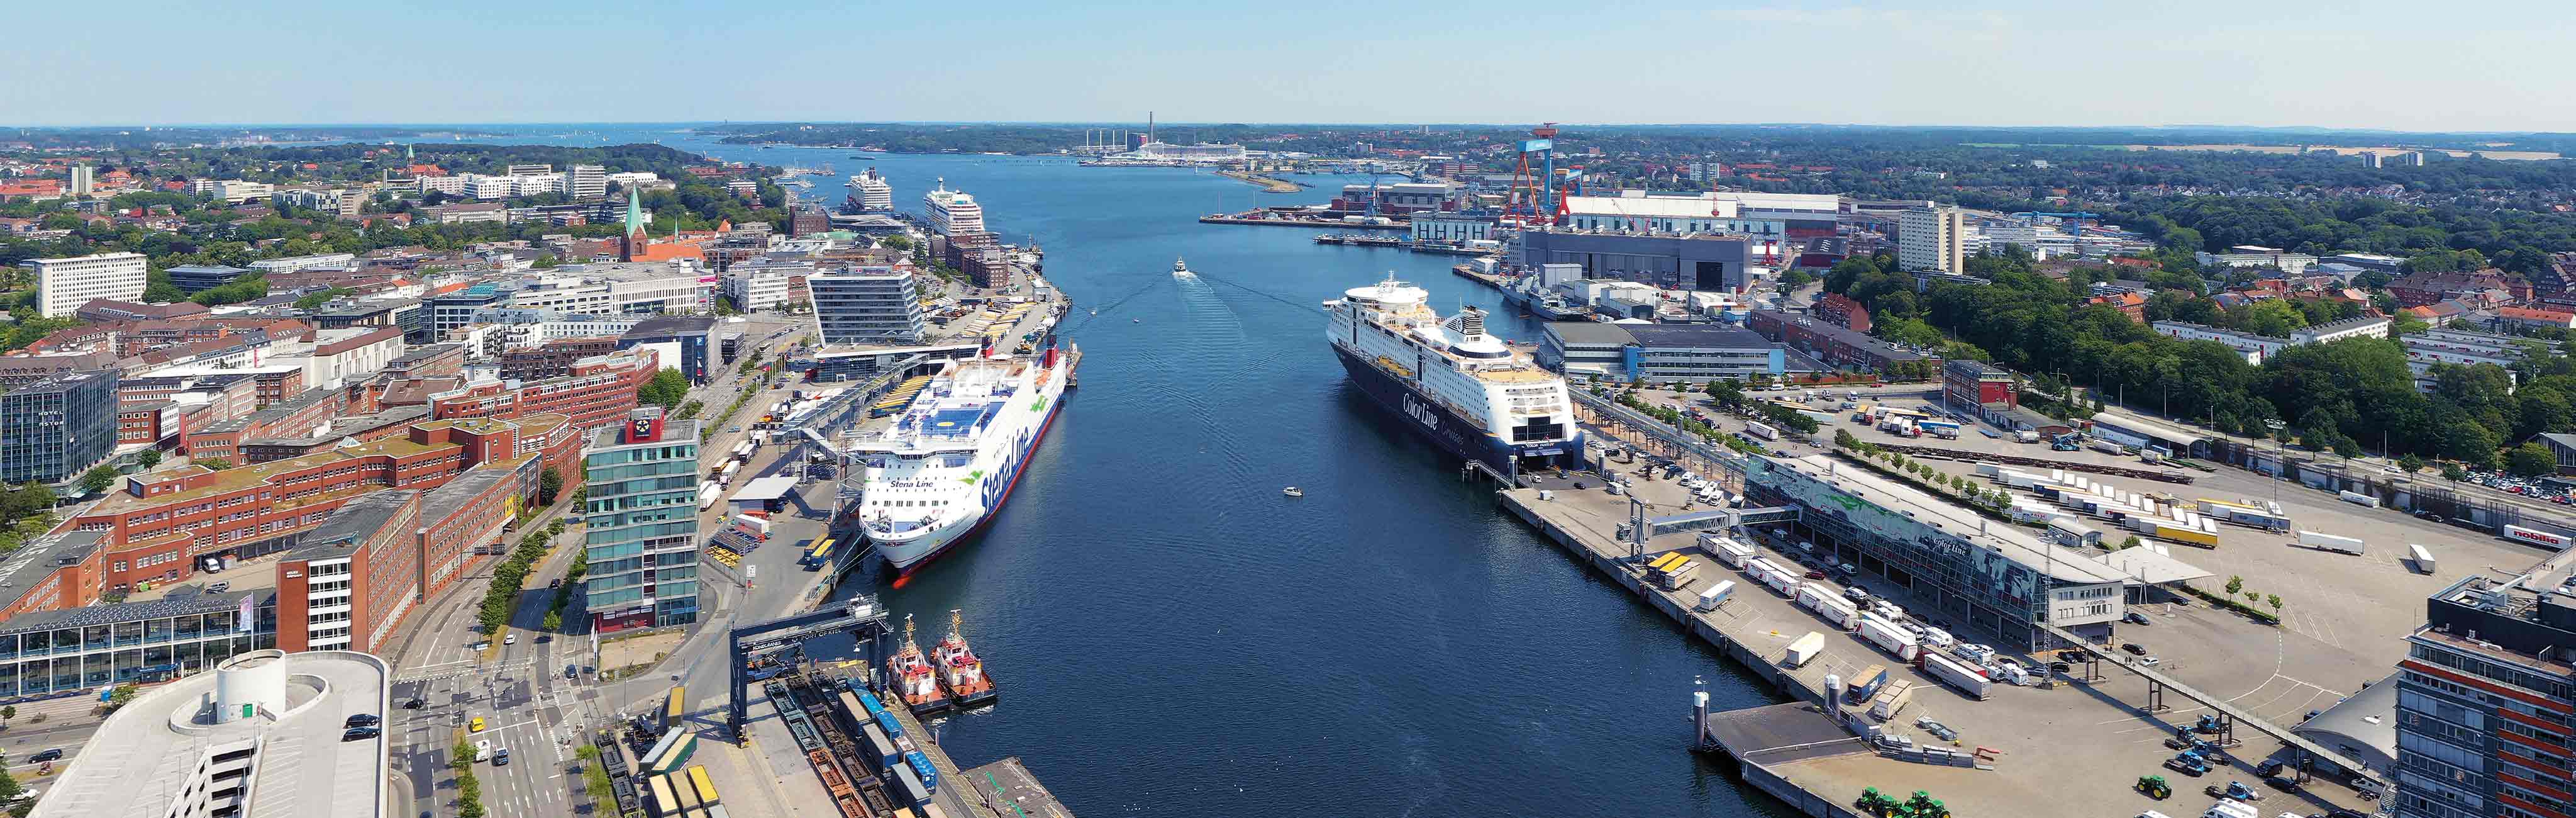 You can see the view from the city center over the harbor parts of PORT KIEL as an aerial photo.